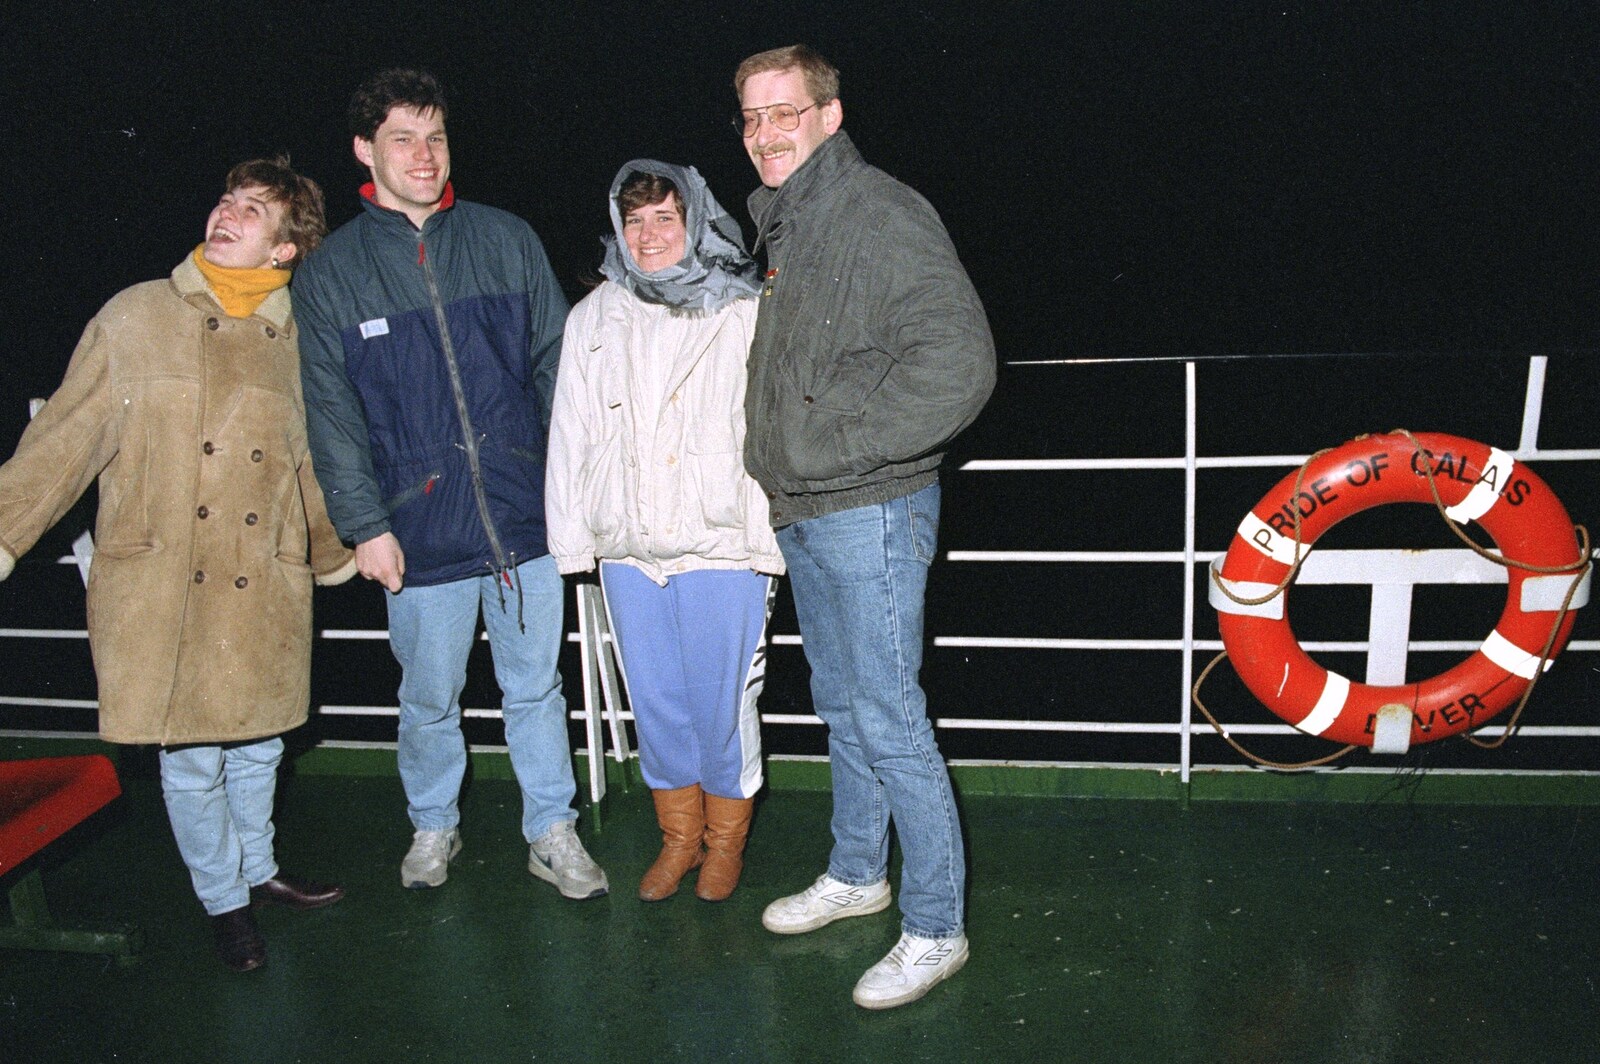 On the Pride of Calais from Clays Does Bruges, Belgium - 19th December 1992